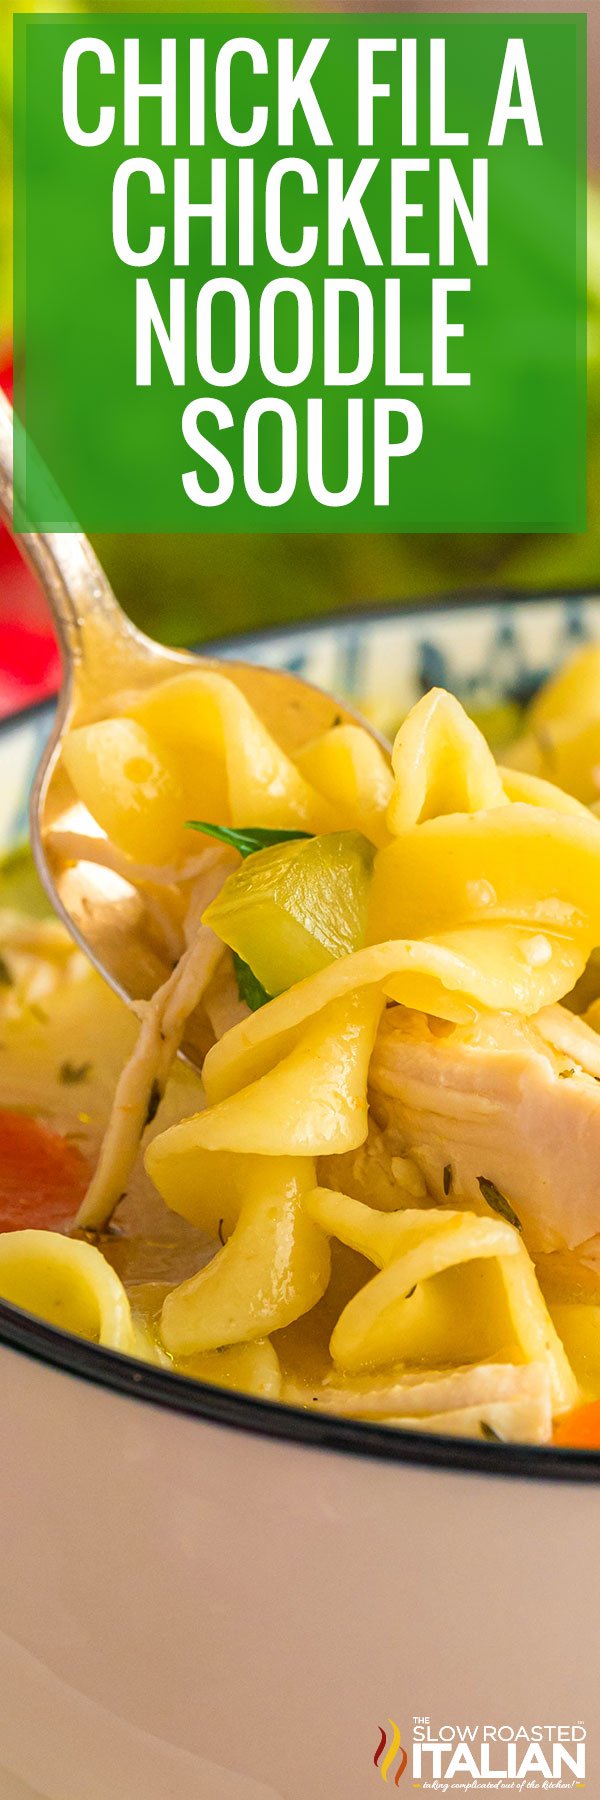 Chick Fil A Chicken Noodle Soup - PIN